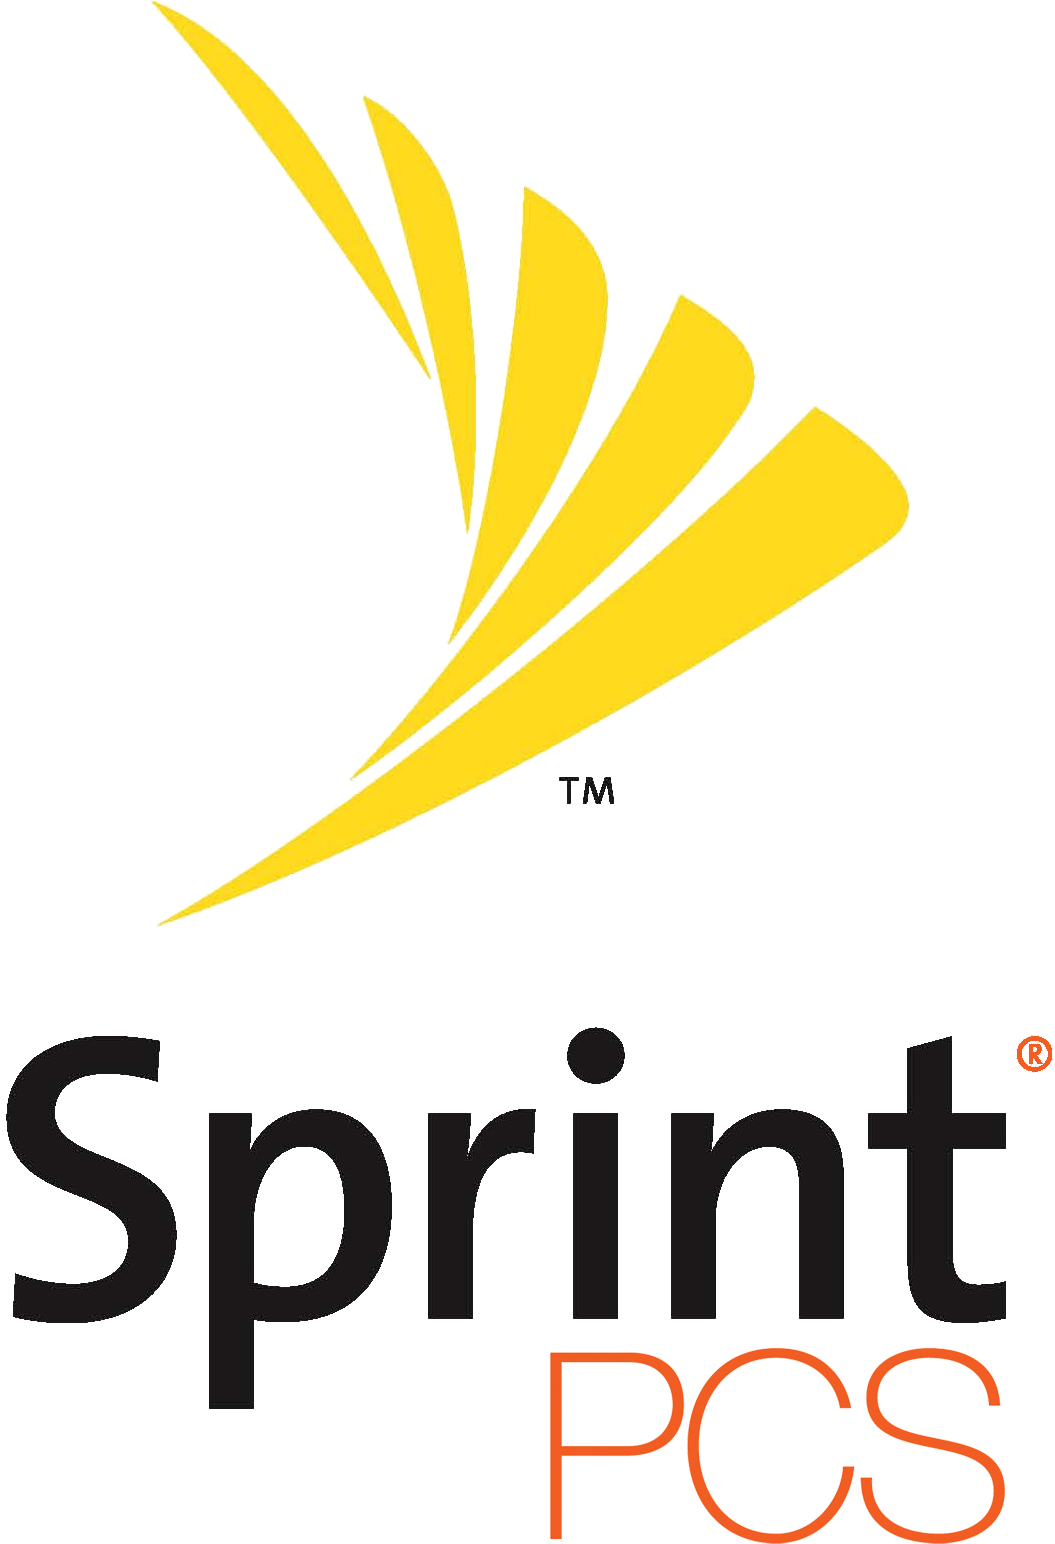 Watch Out, T-Mobile, Sprint May Be Gunning for MetroPCS Again